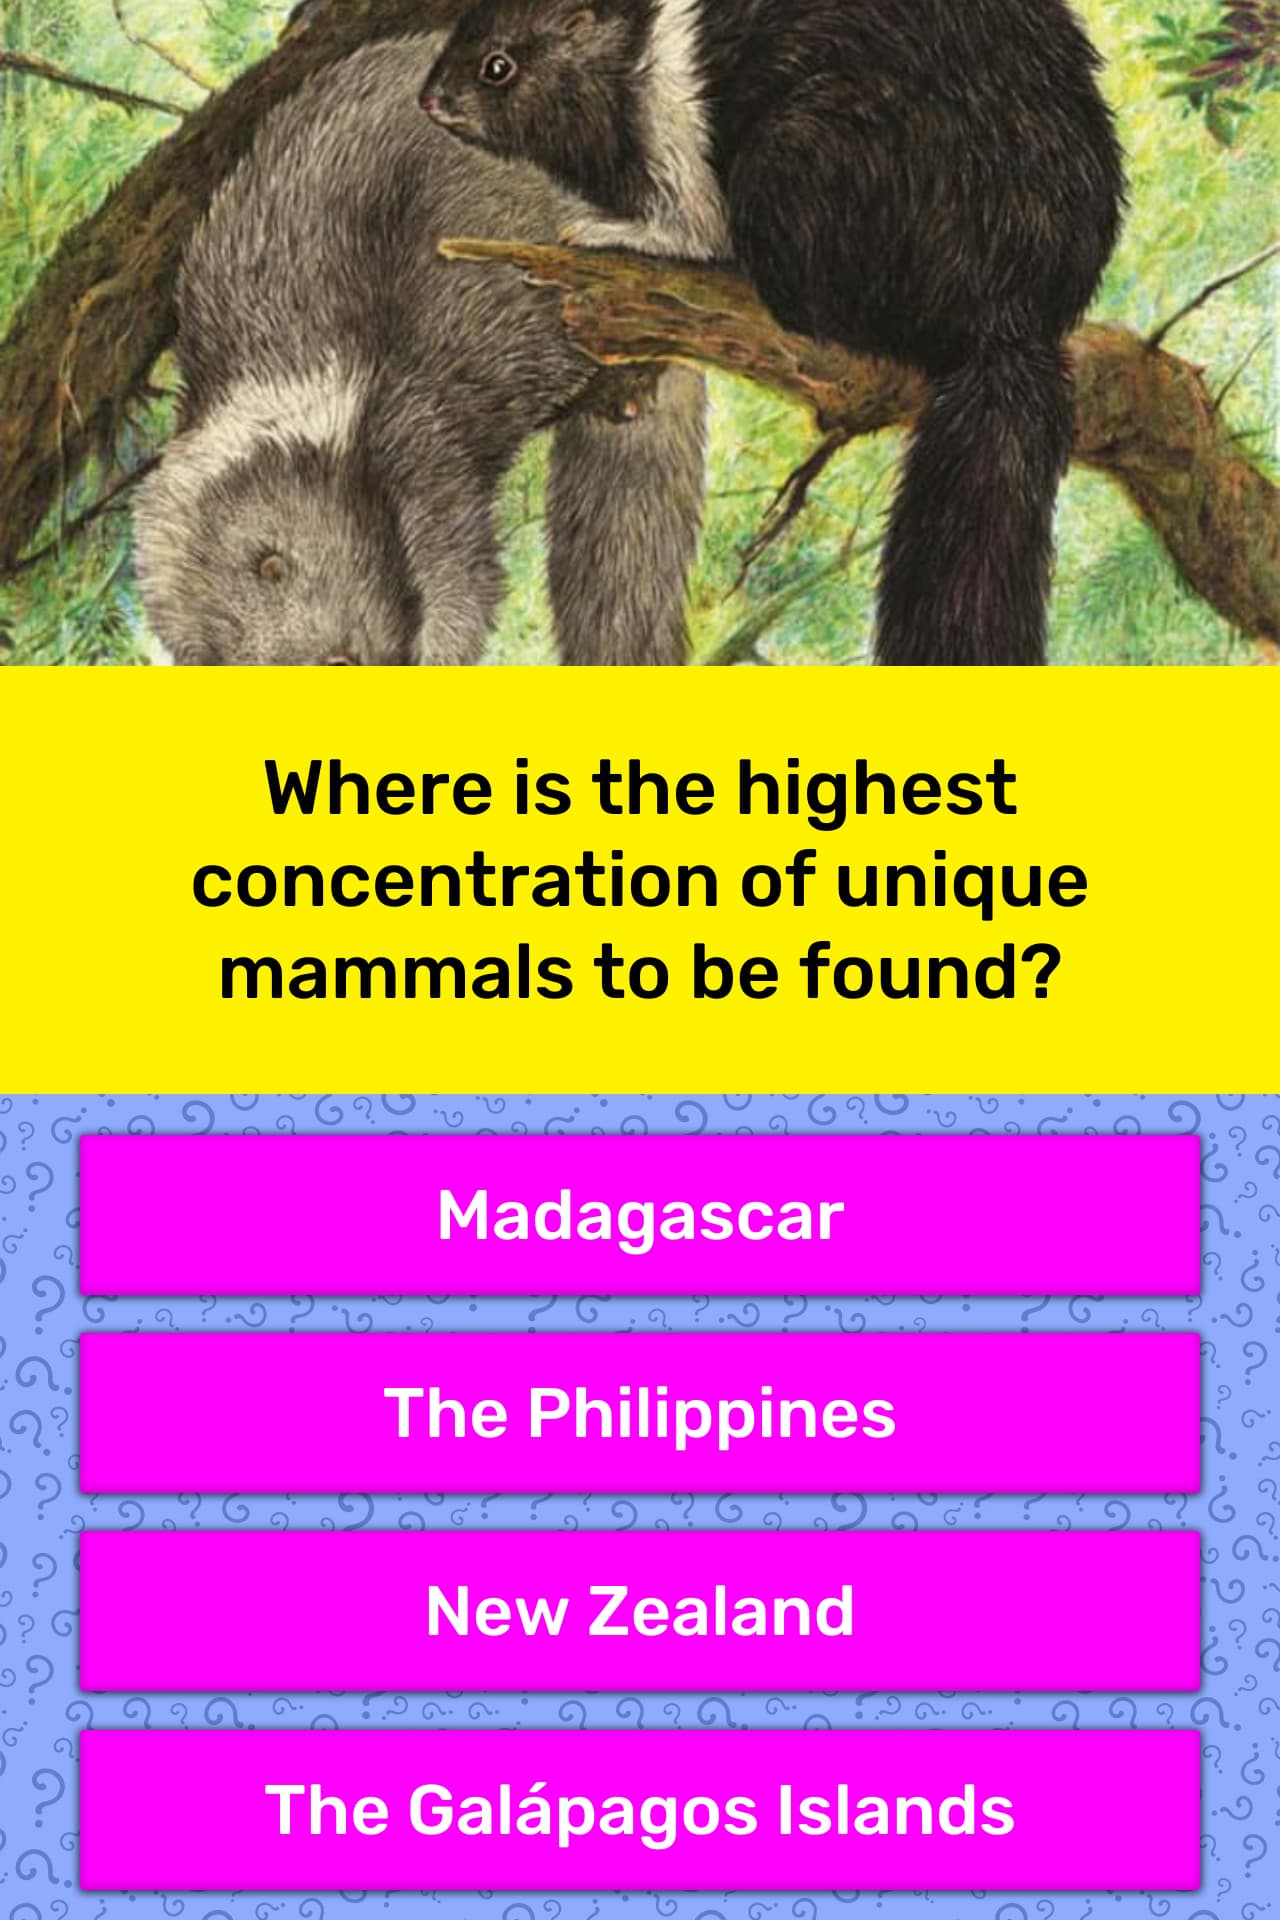 Which area has the highest concentration of large mammals?